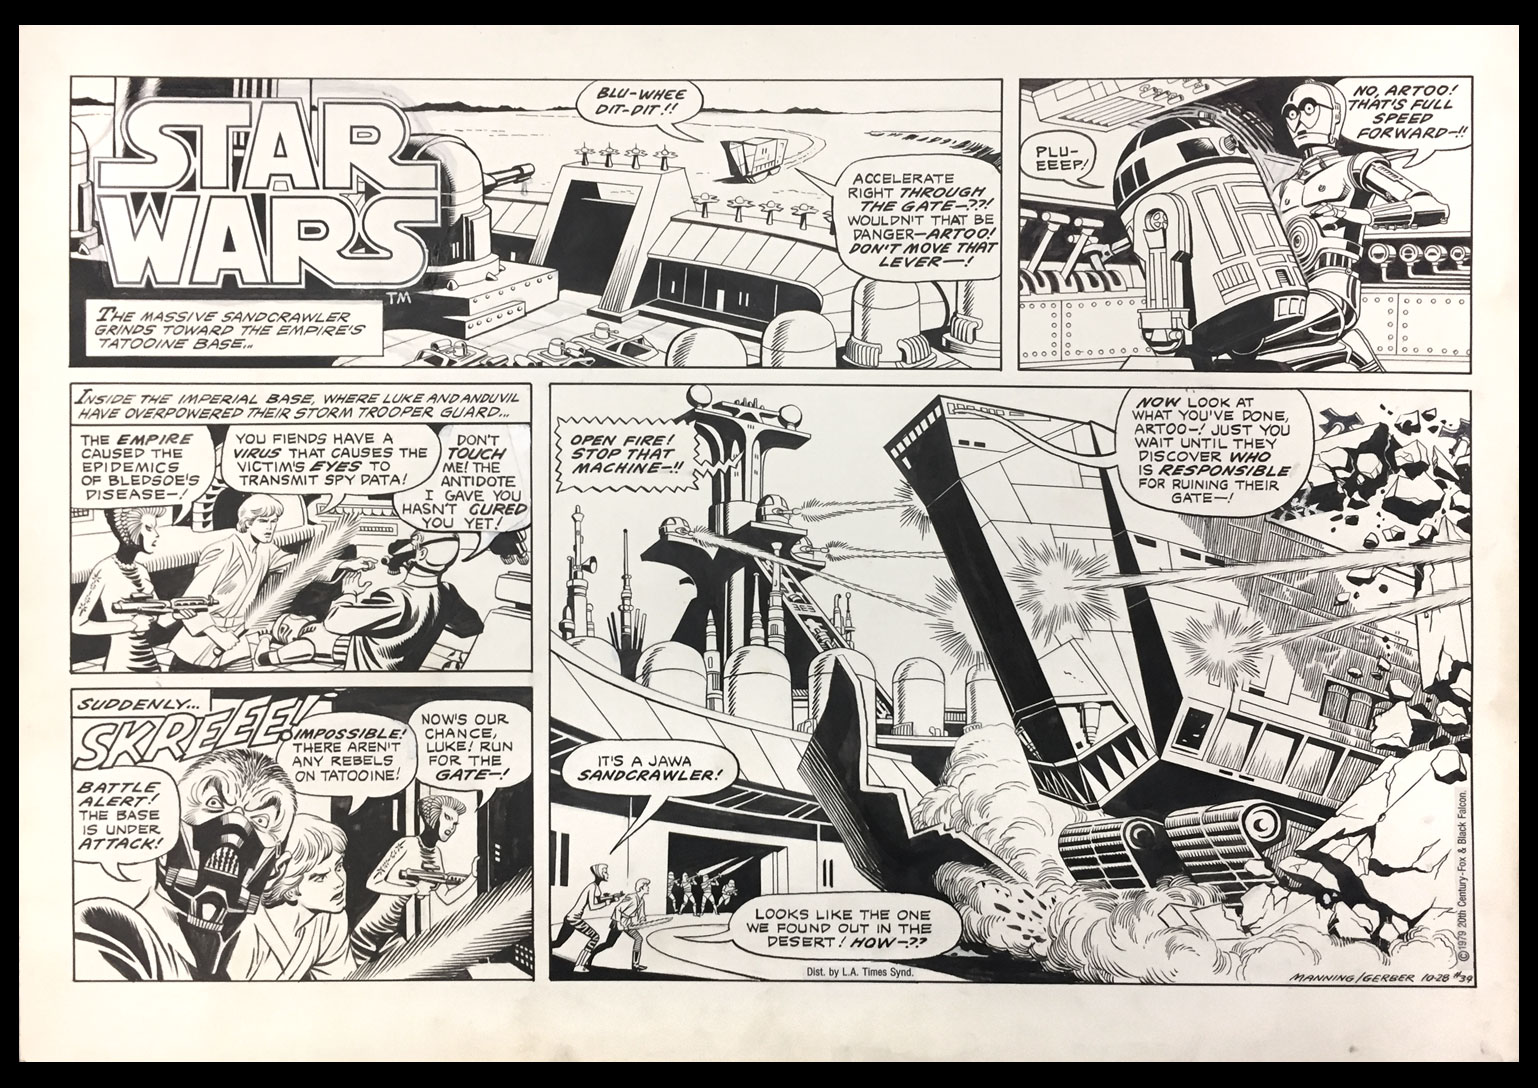 Star Wars Sunday Page #26 by Russ Manning from 9/2/1979 Large Half Page Size! 